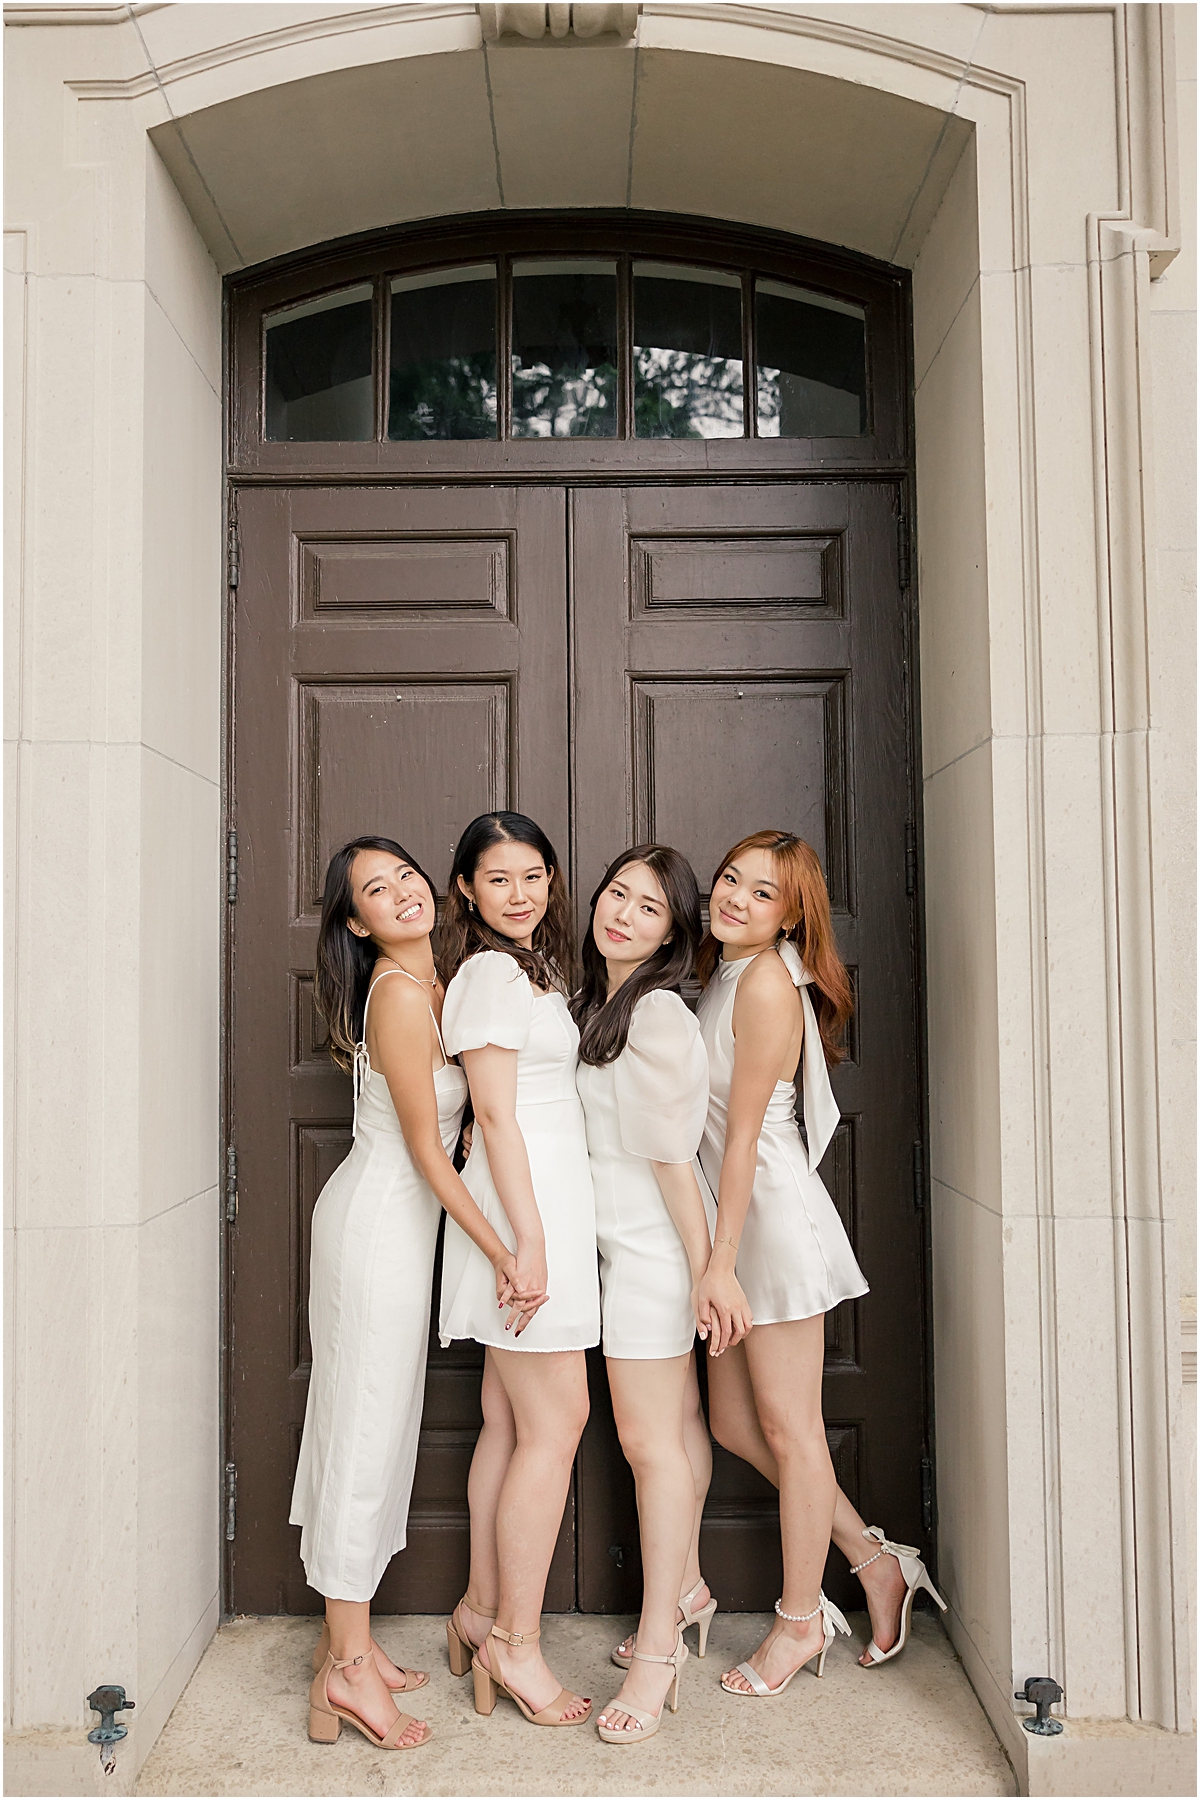 4 girls at Emory University in different styles of white dresses posing in front of brown doors for an Emory University Senior Photographer